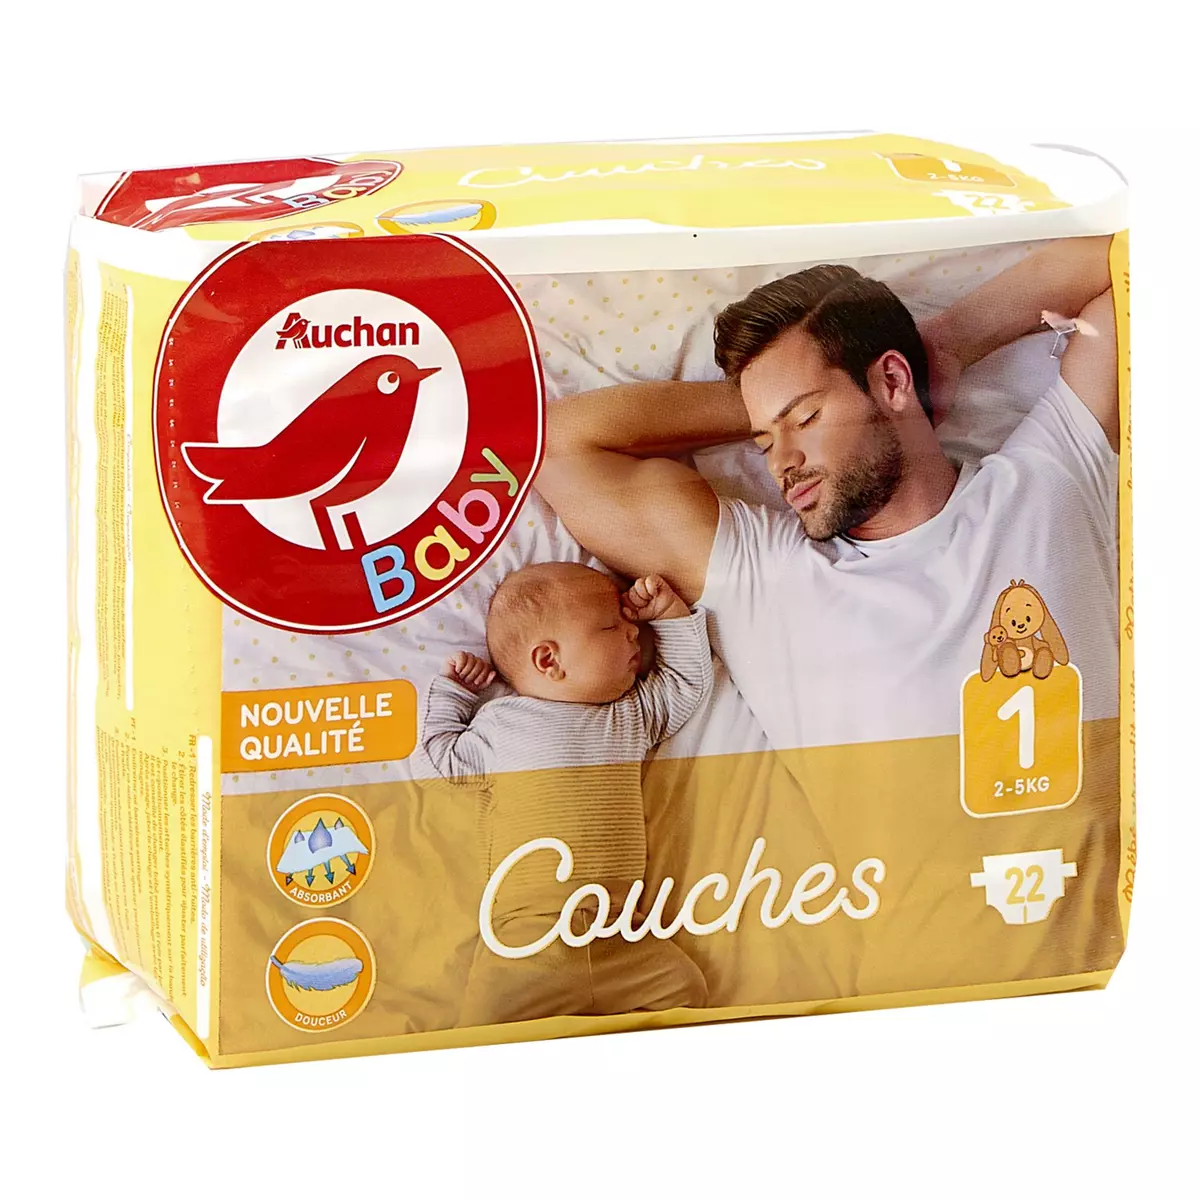 Pampers Harmonie Couches taille 1